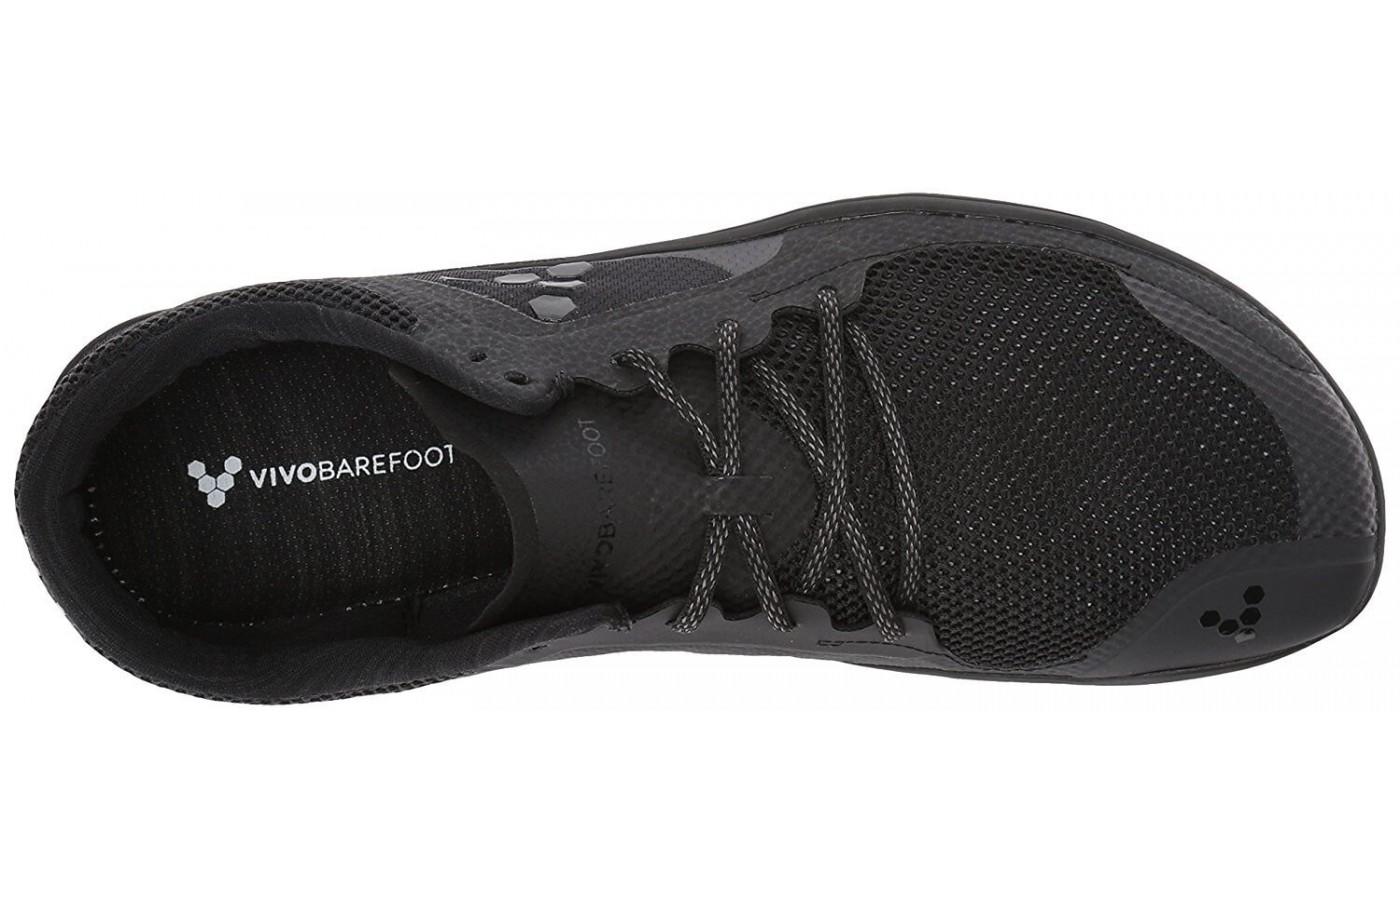 Overall, the Vivobarefoot Primus Lite is a lightweight and tight-fitting shoe.